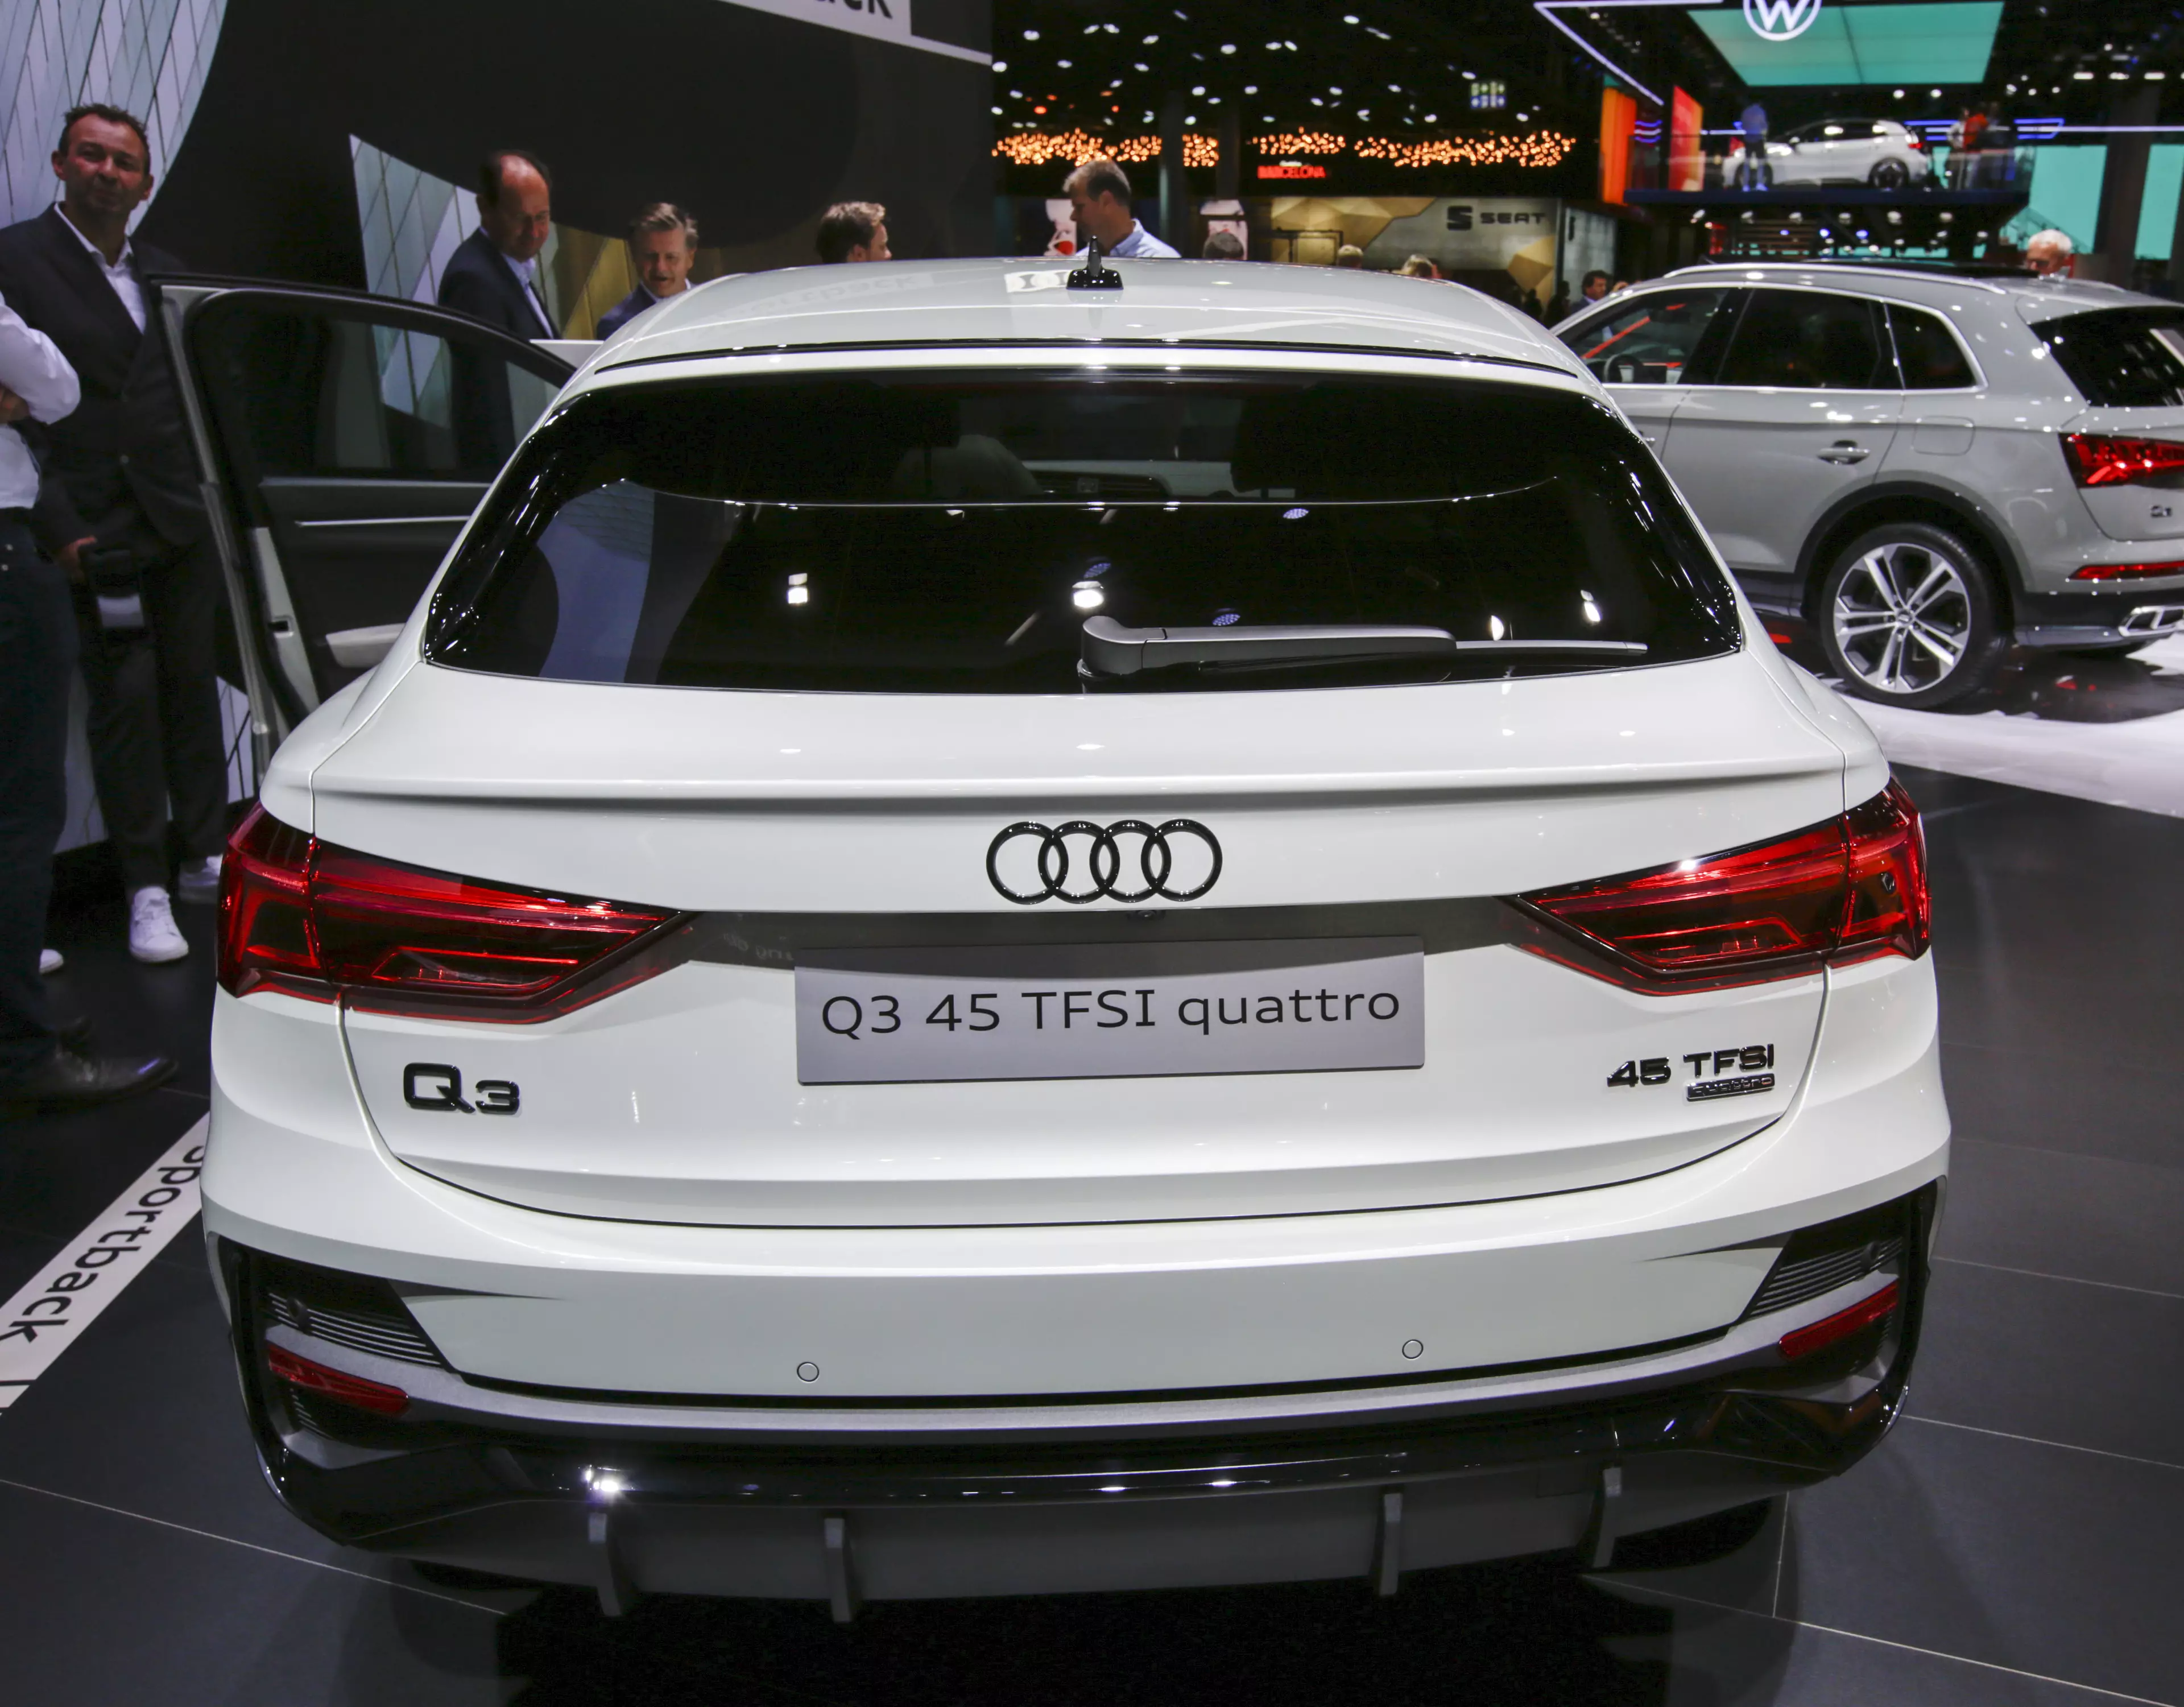 Audi drivers are the worst, a study has found.